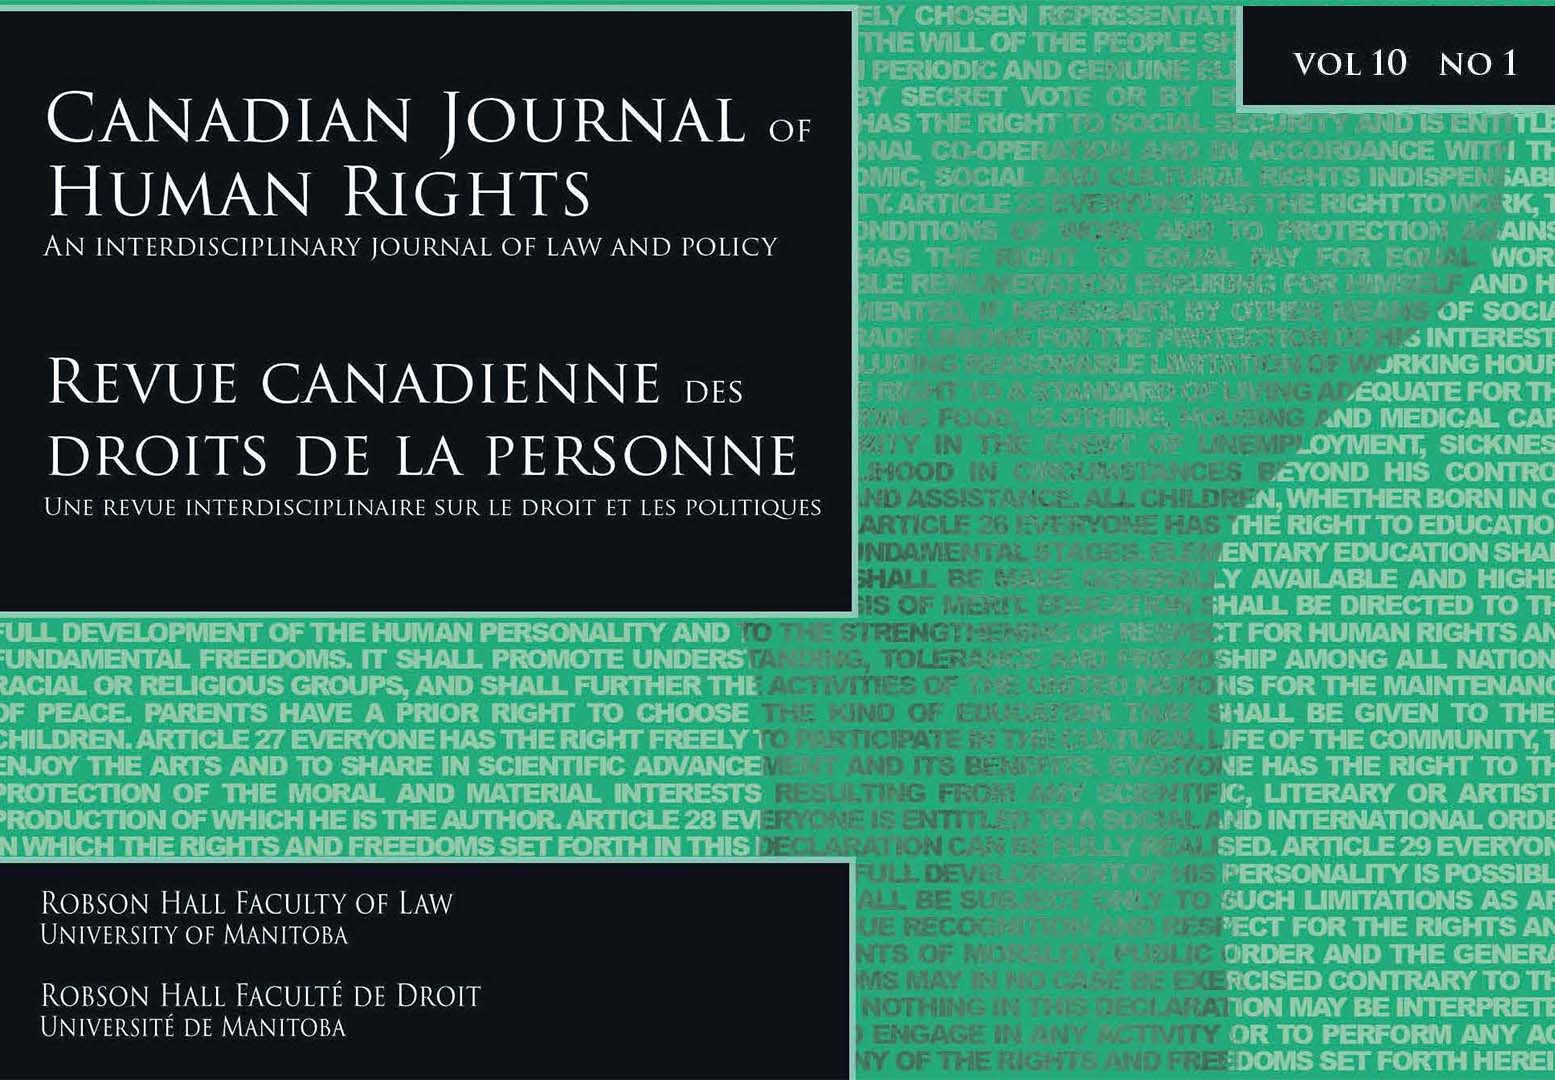 Canadian Journal of Human Rights celebrates publication of 10th anniversary edition